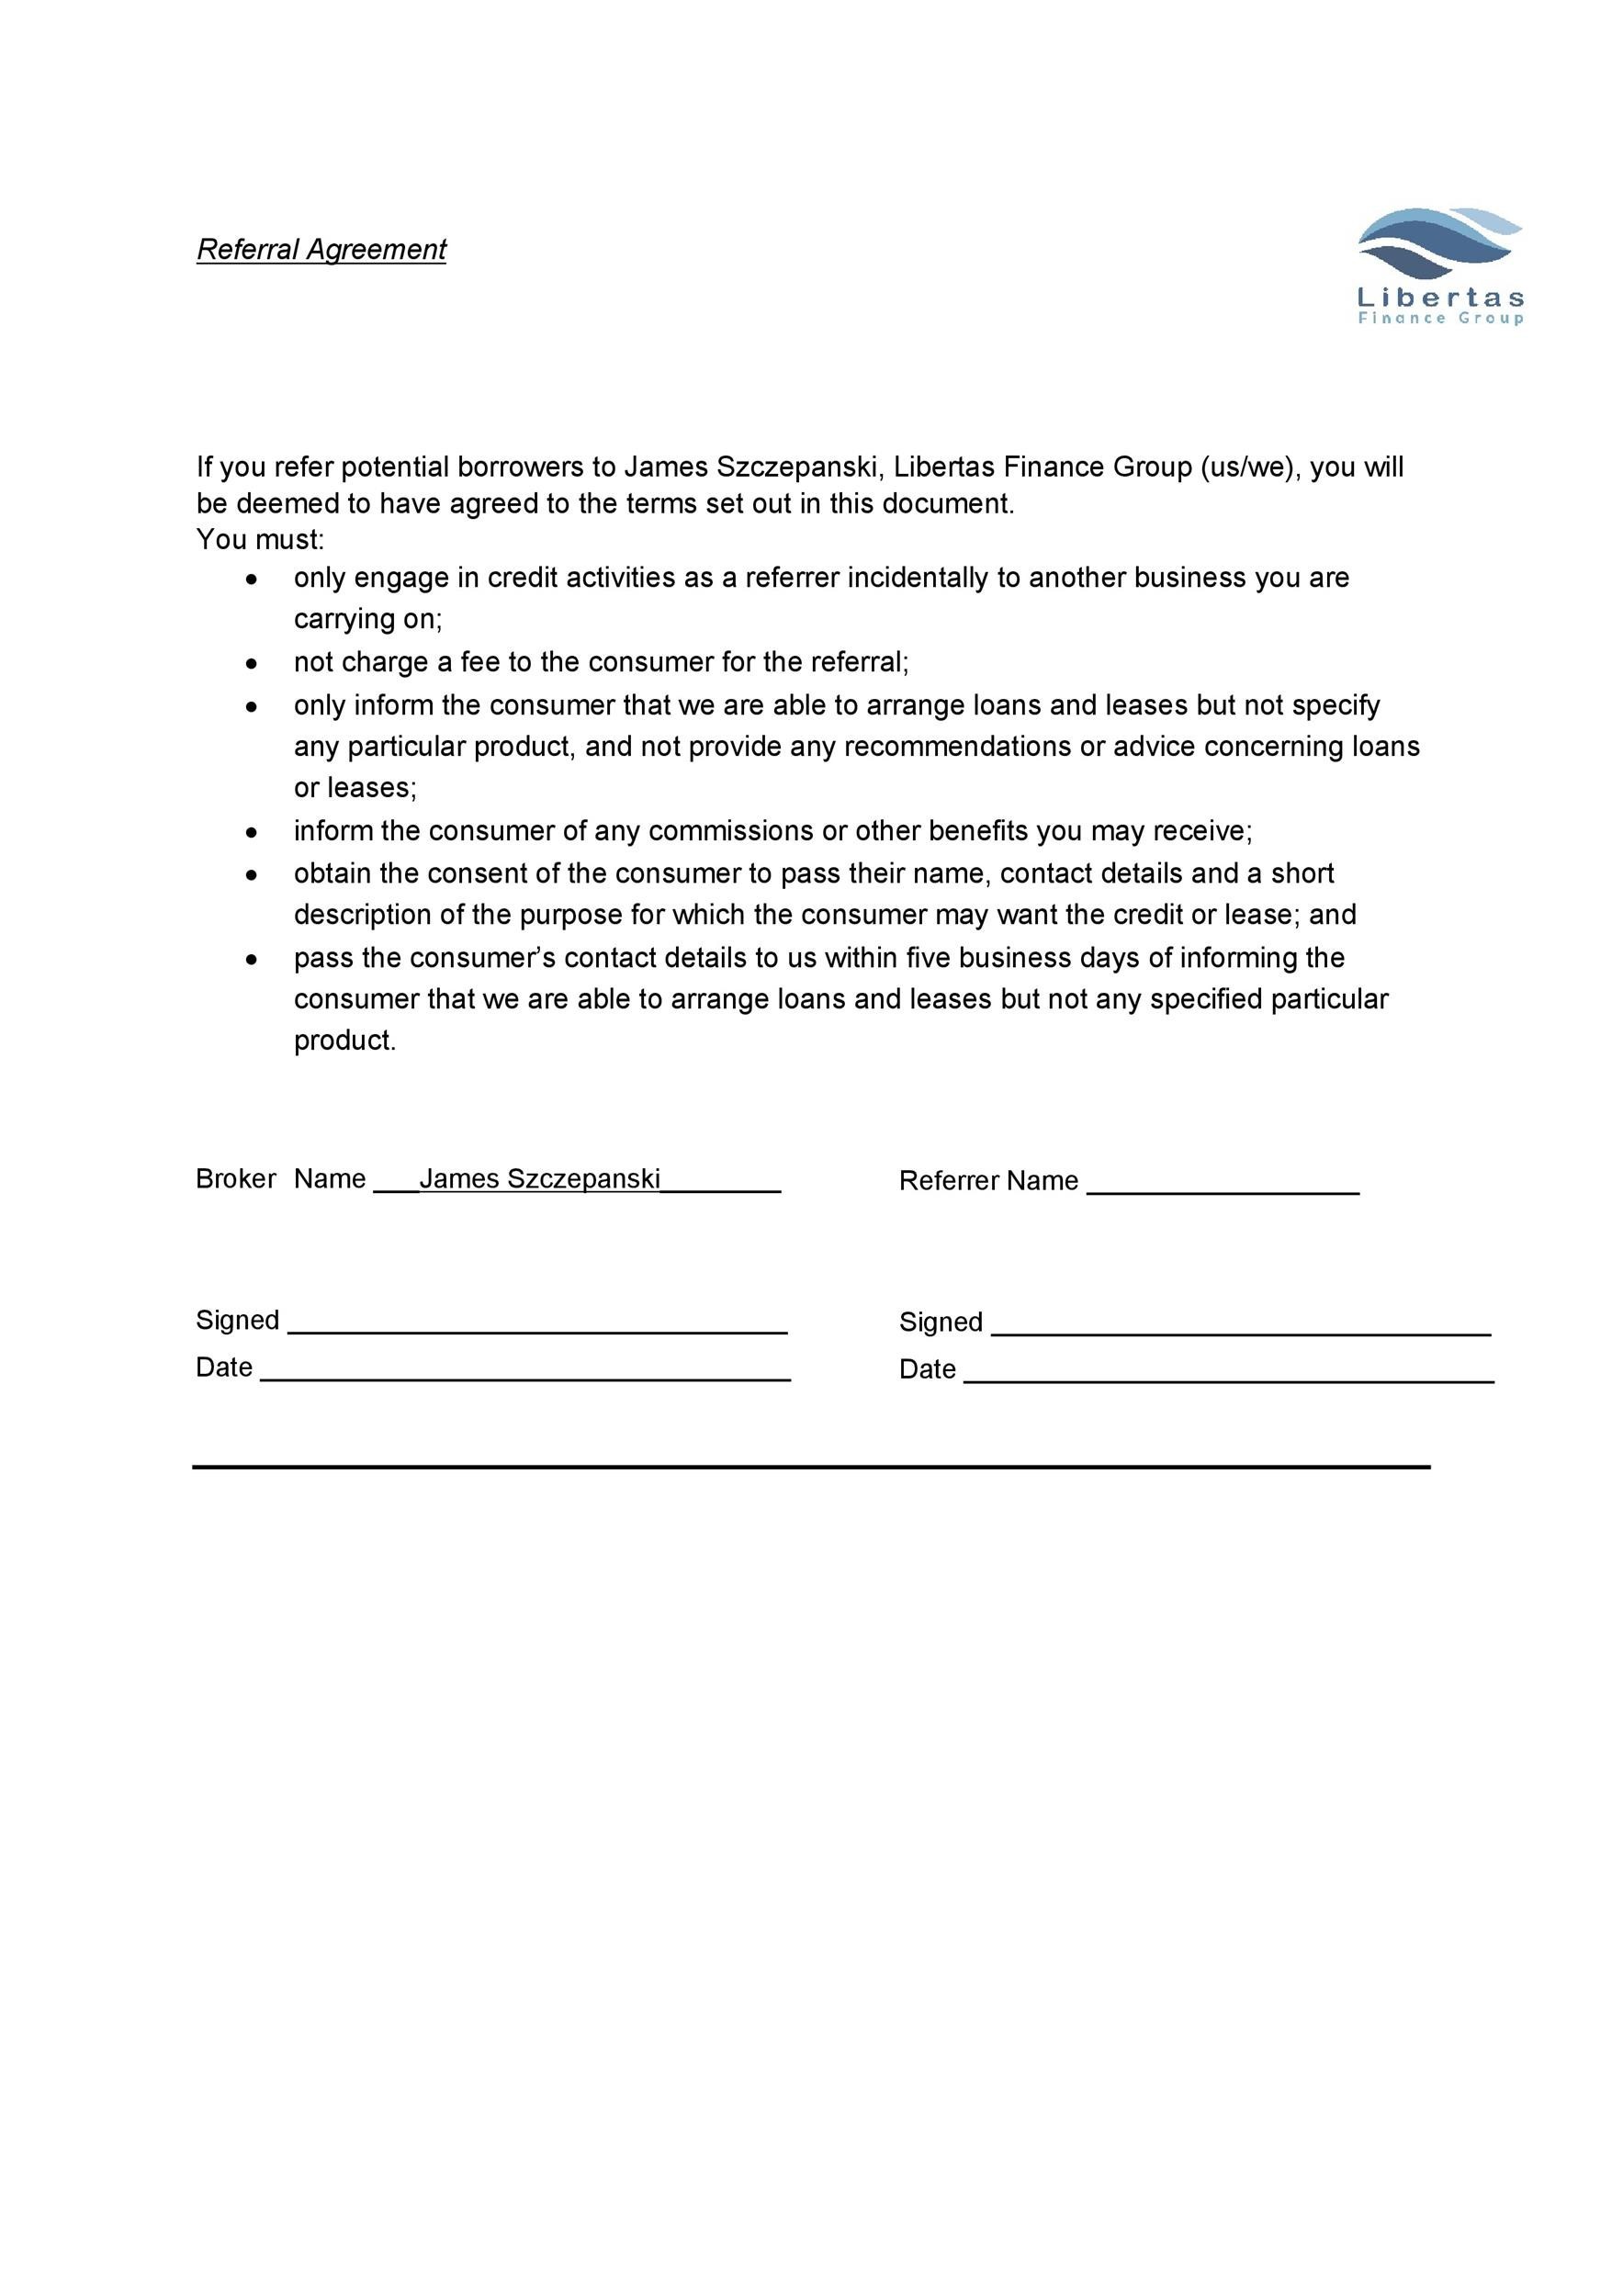 Free referral agreement template 39